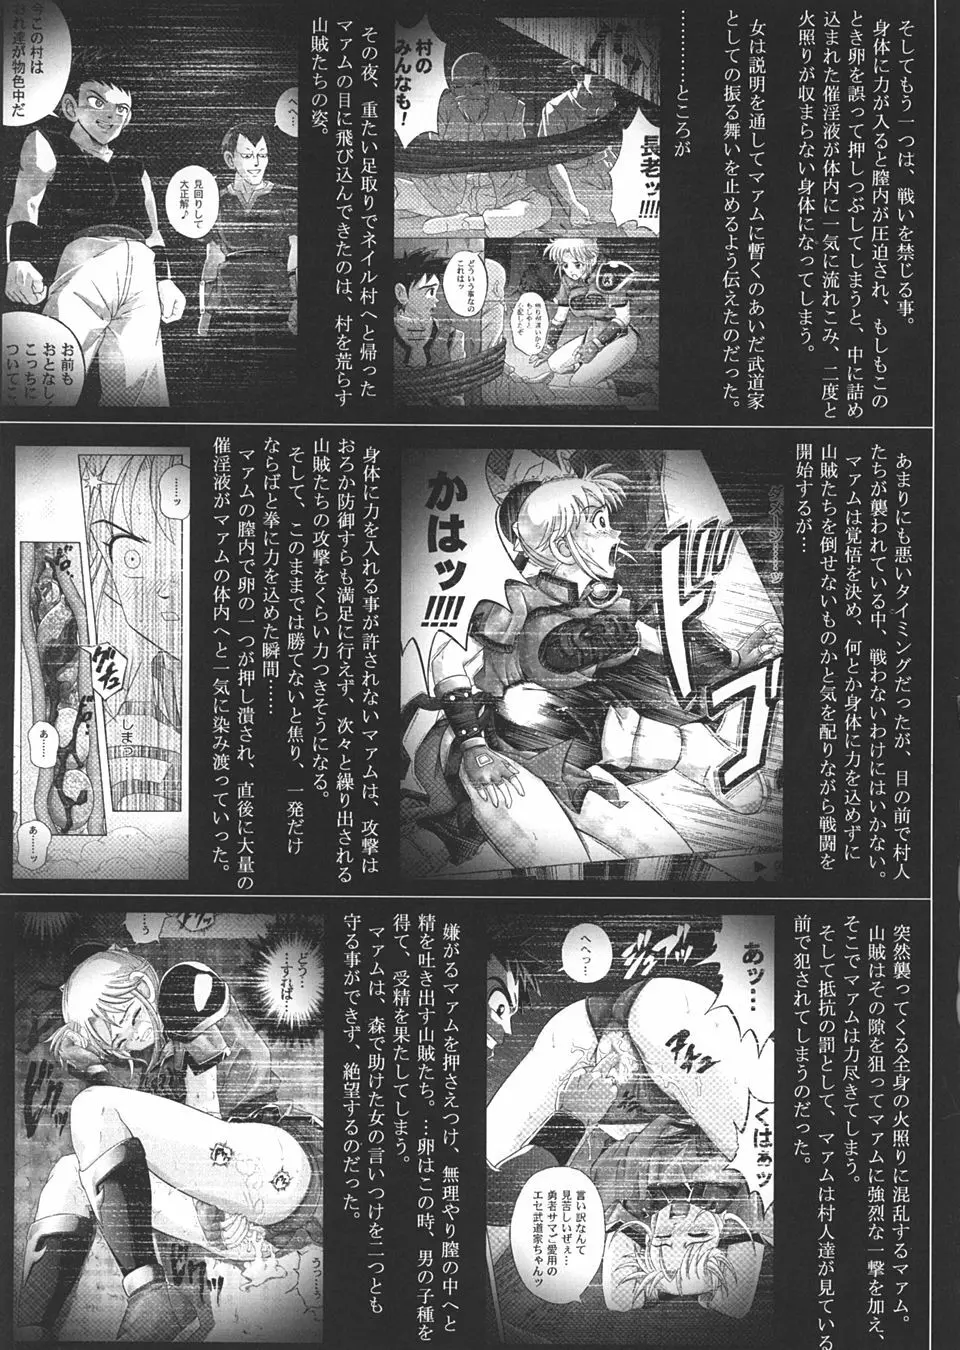 Sinclair 2 & Extra -シンクレア2- - page6